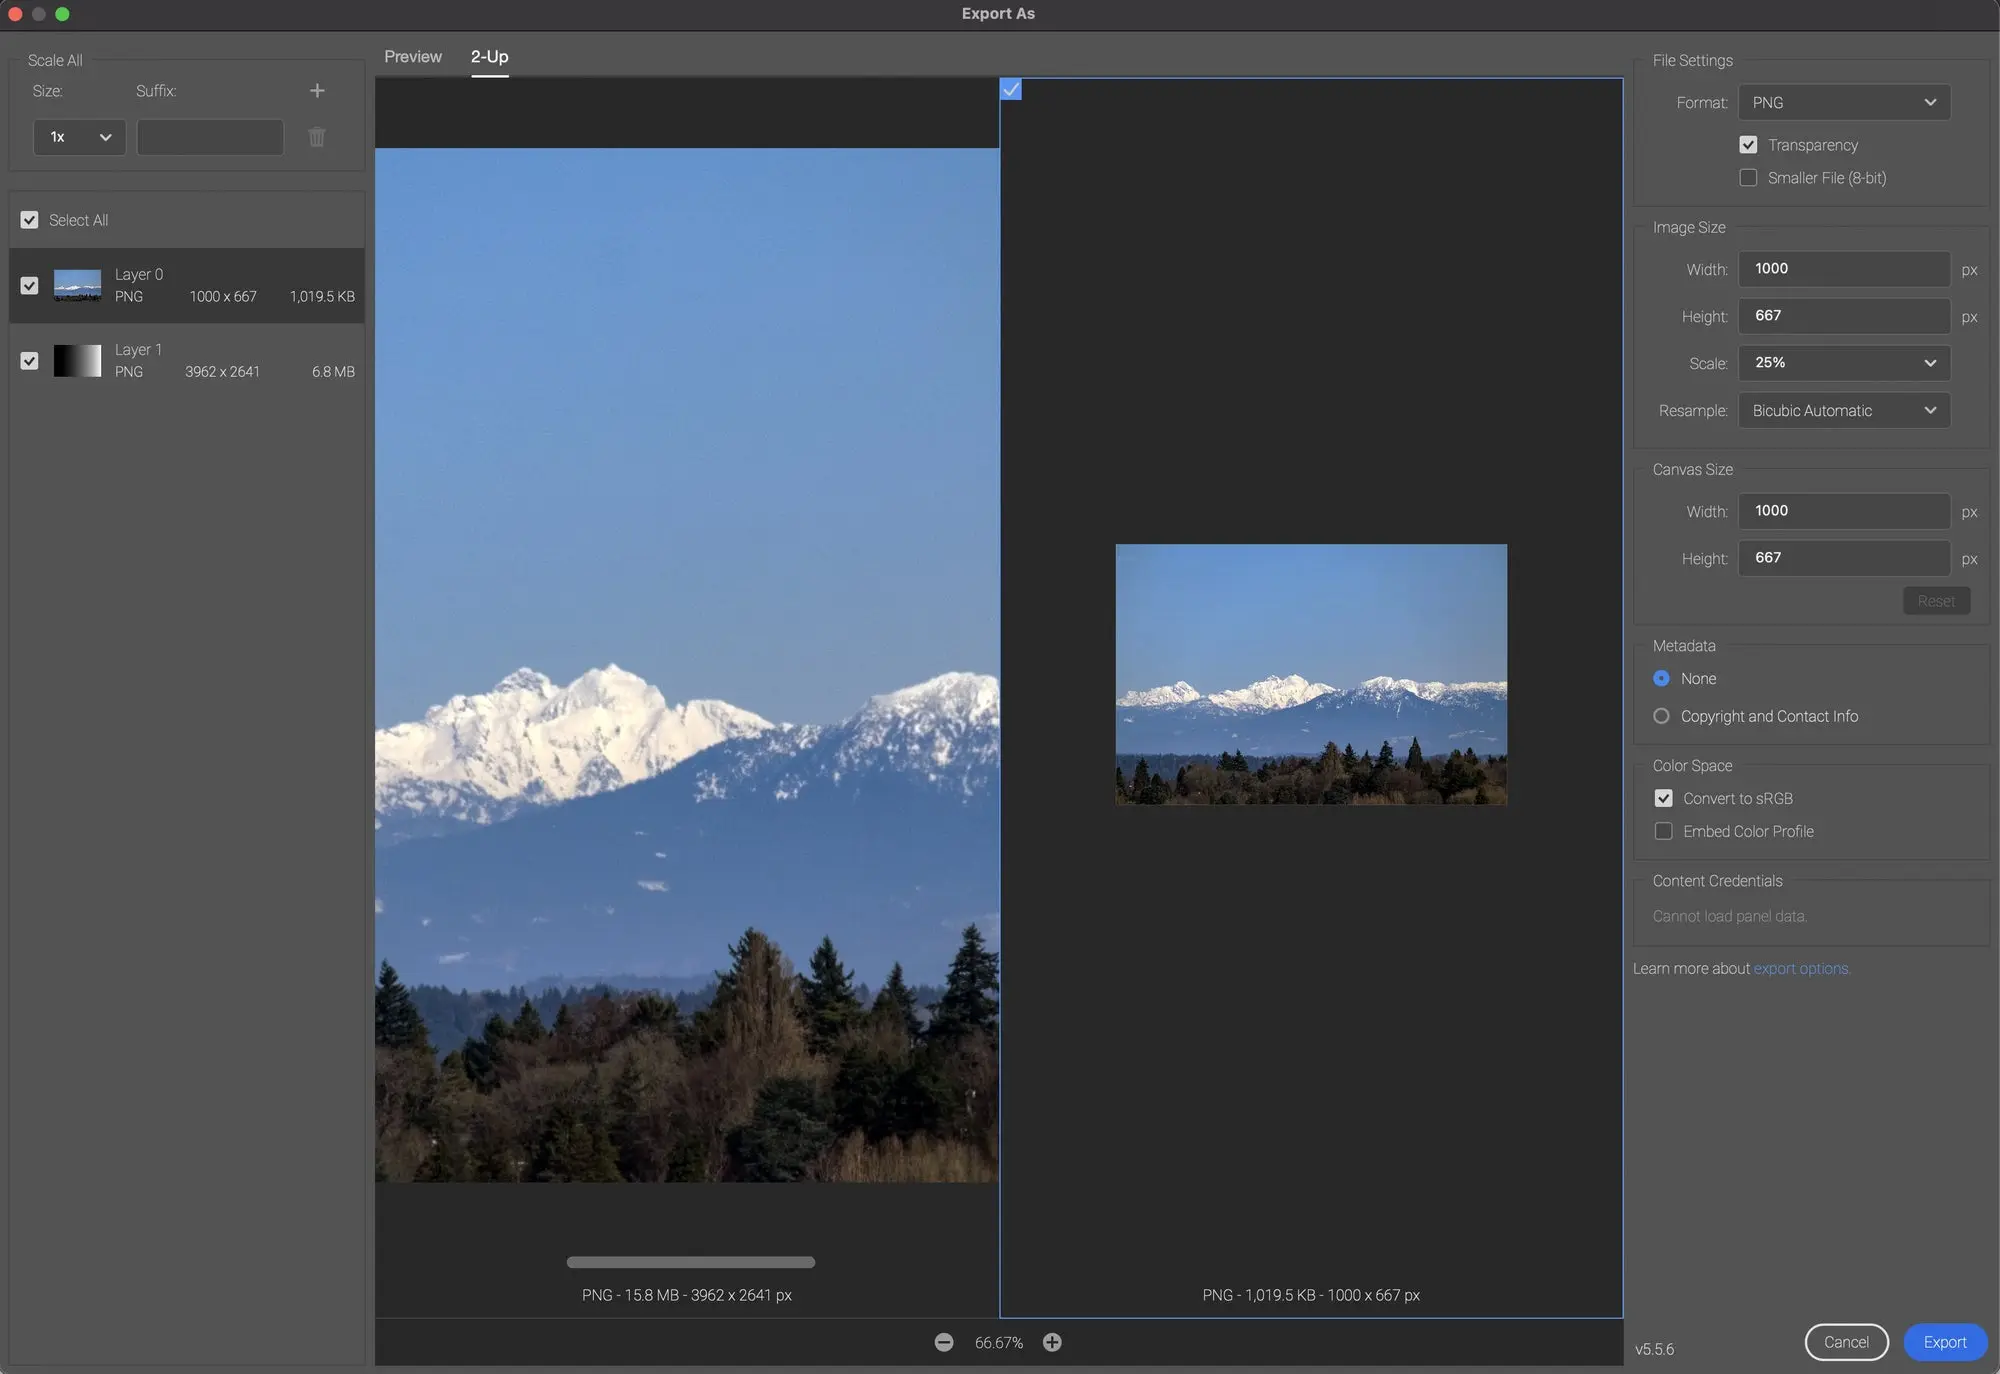 Screenshot of Photoshop's improved export as feature. 